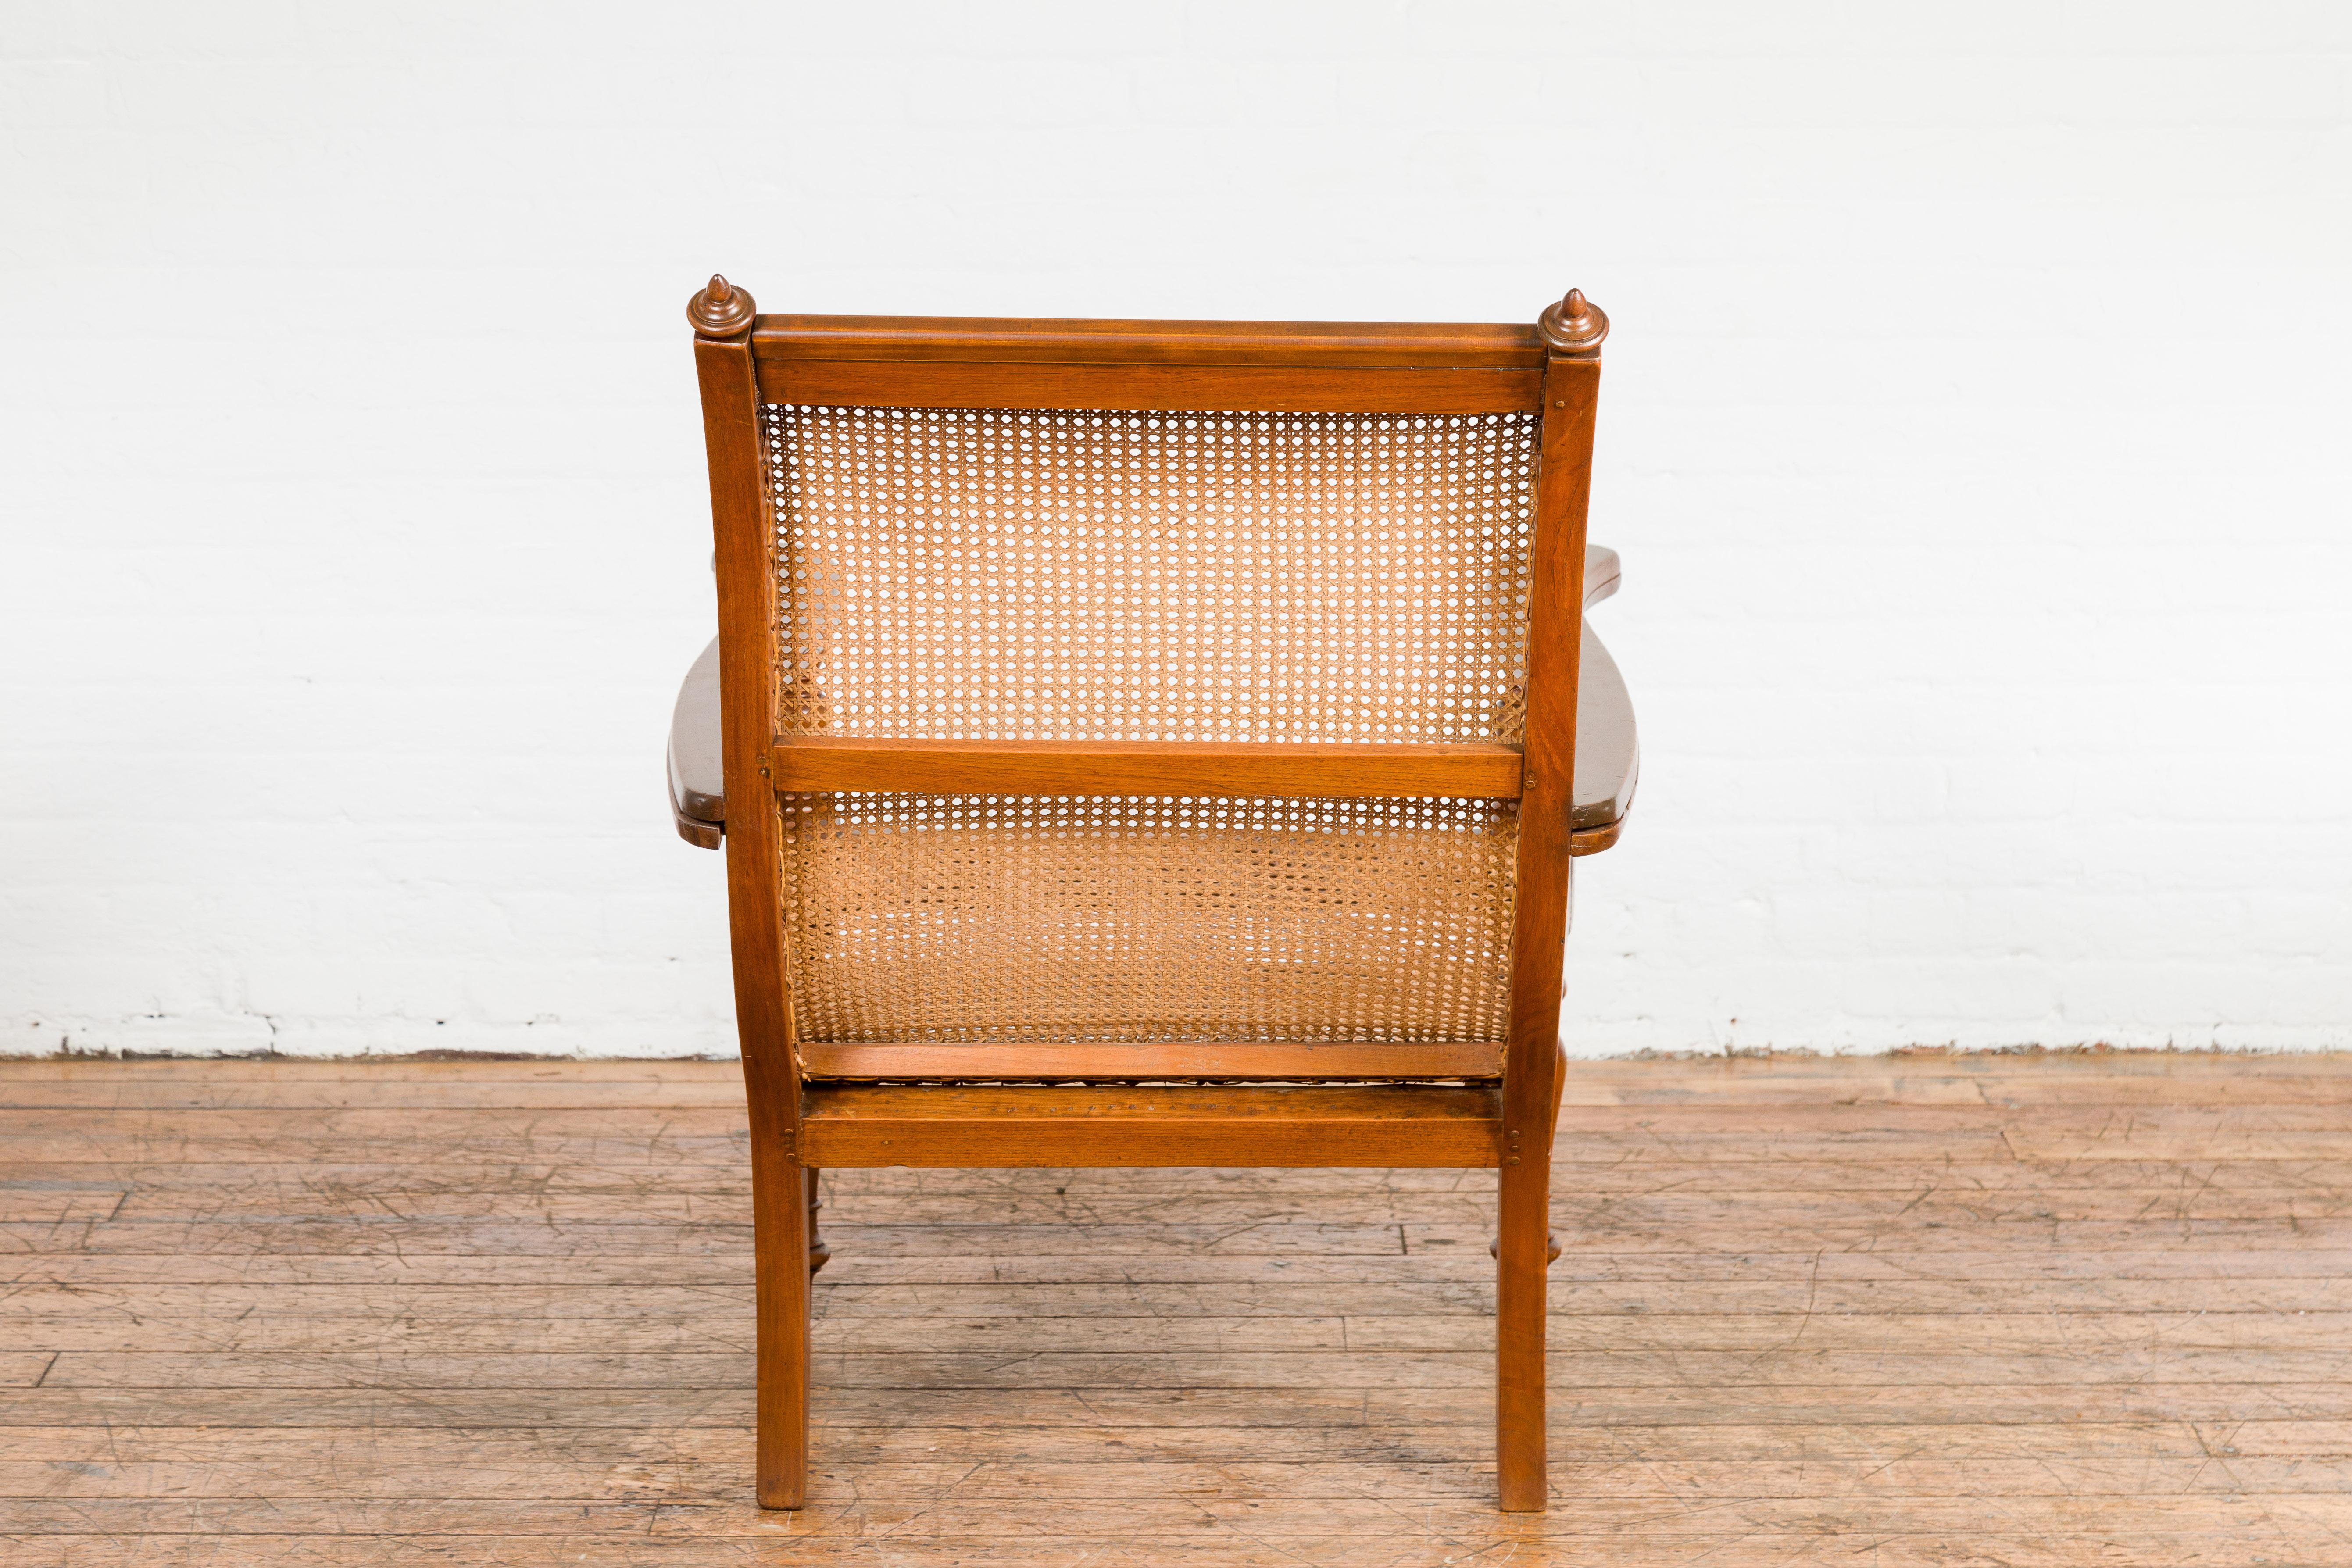 Dutch Colonial Period Wood and Rattan Lounge Chair with Extending Arms For Sale 1